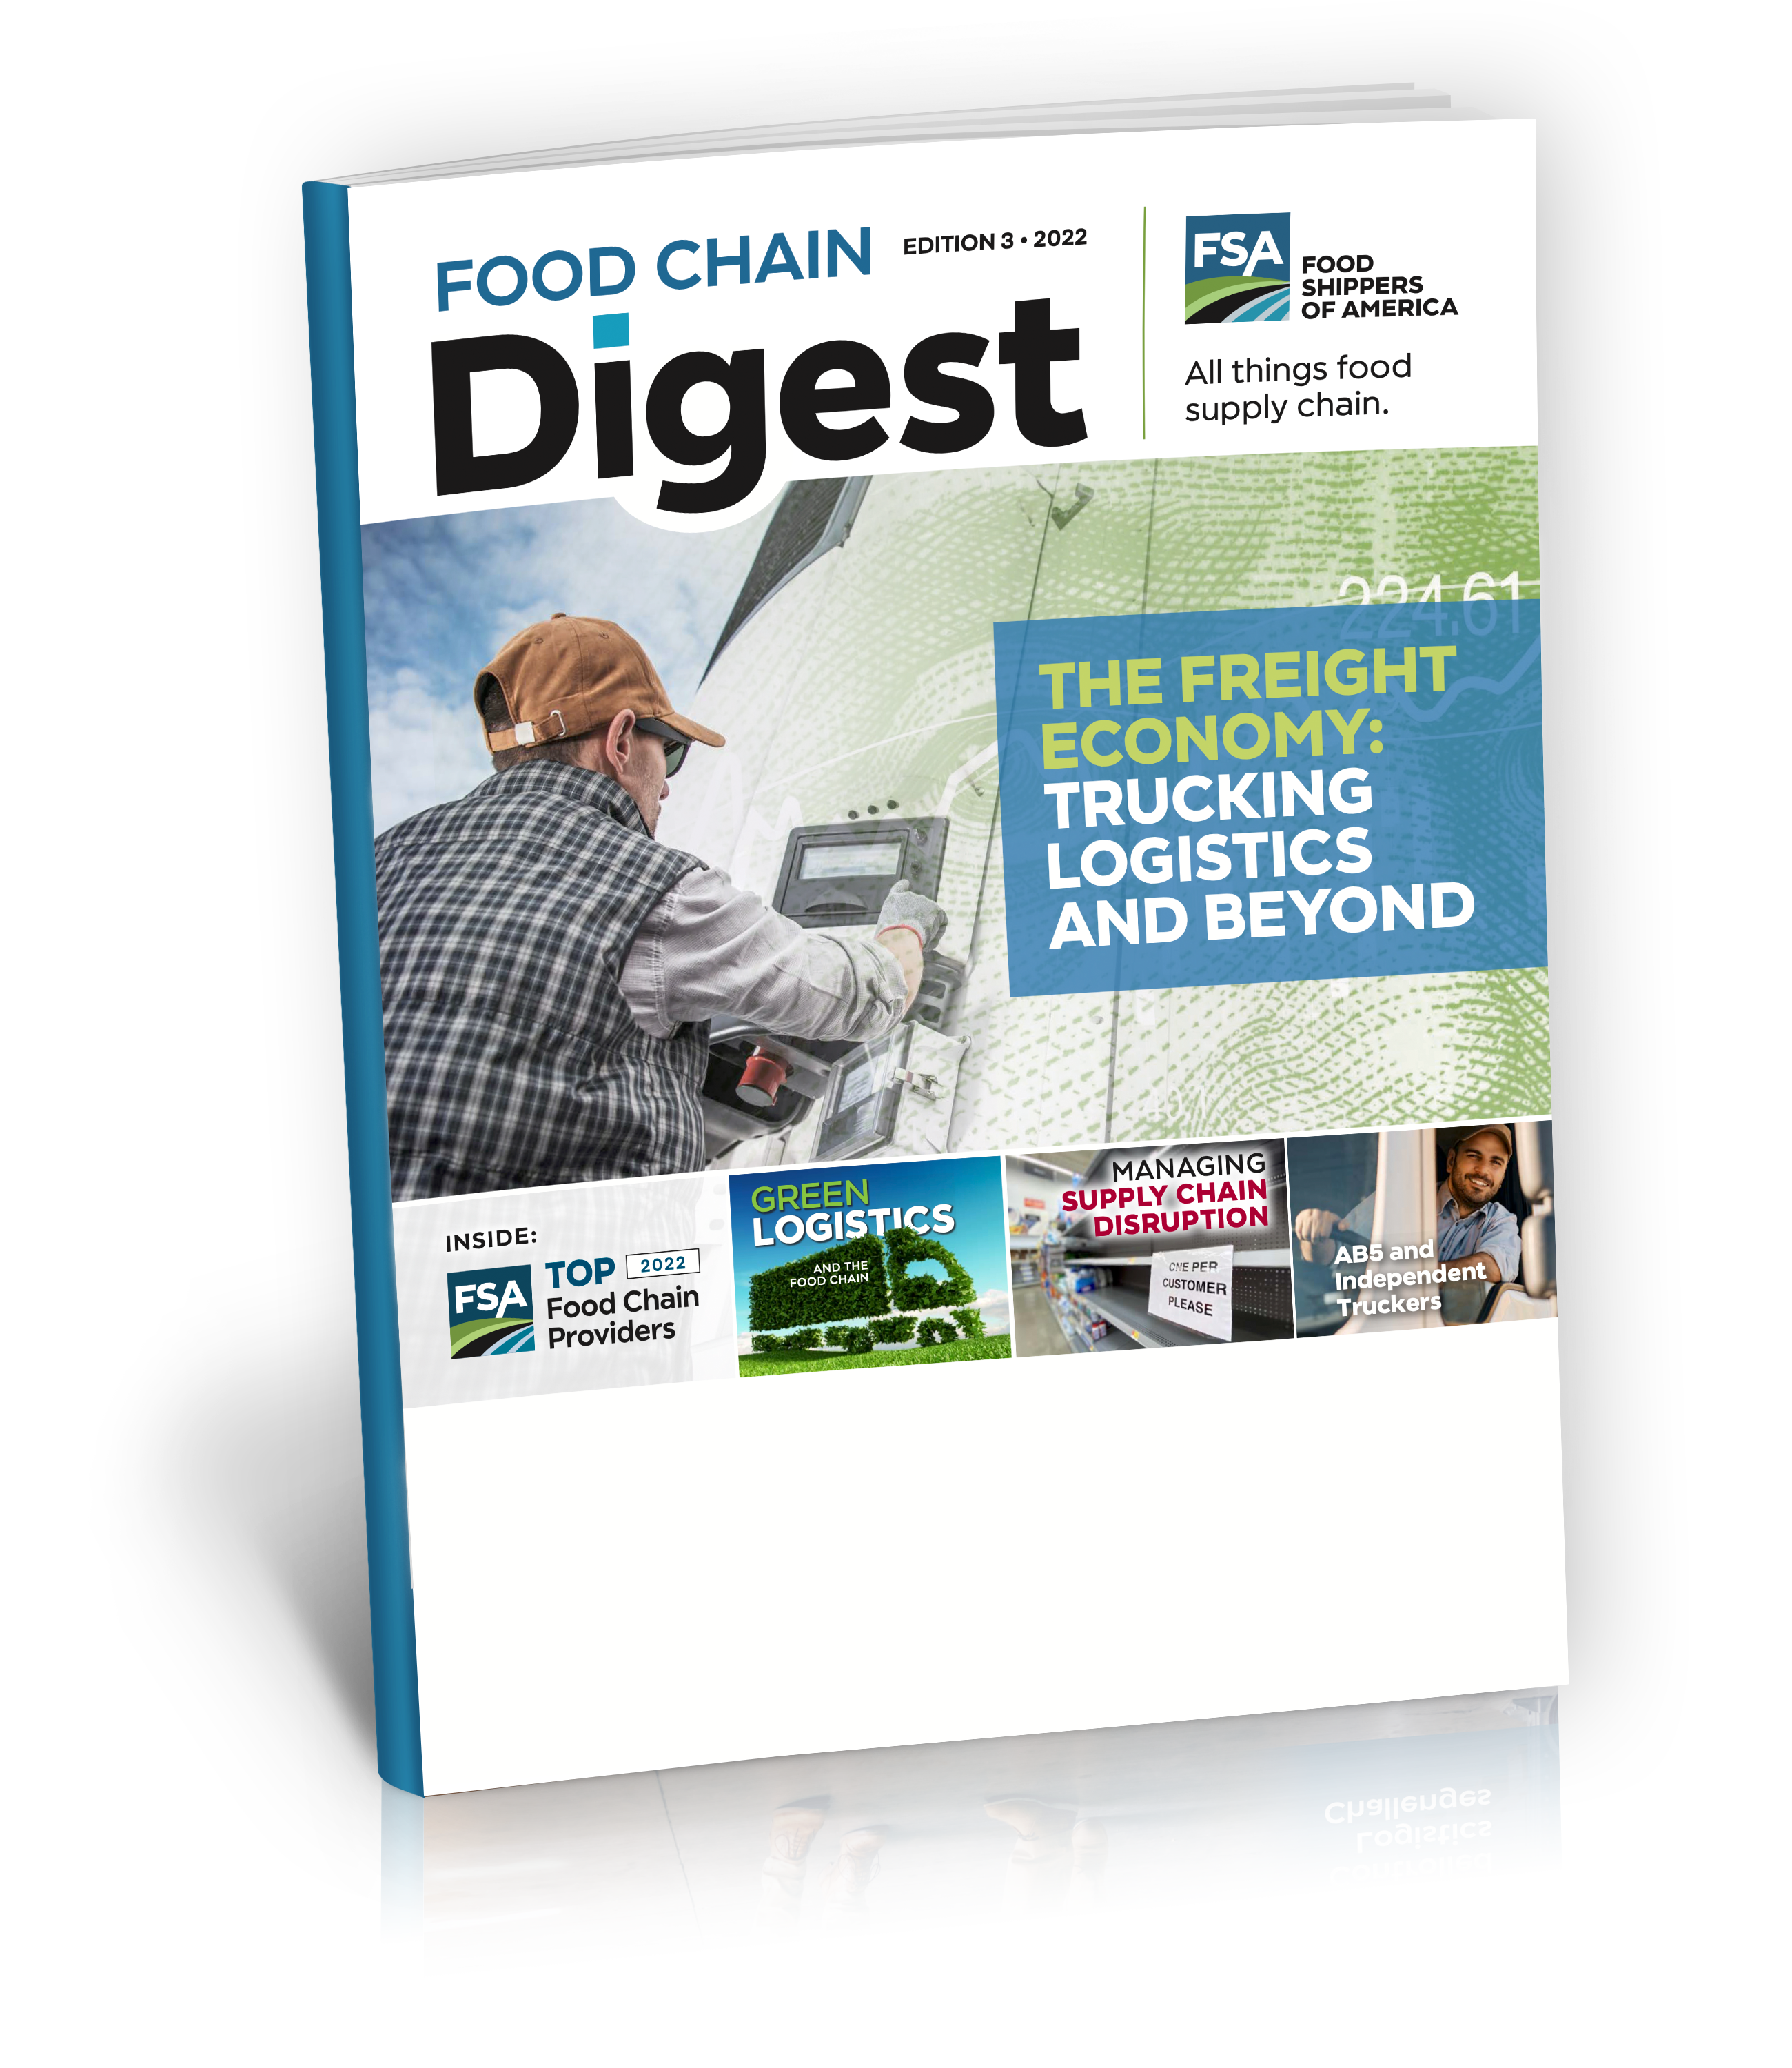 Food-Chain-Digest-Ed3-cover